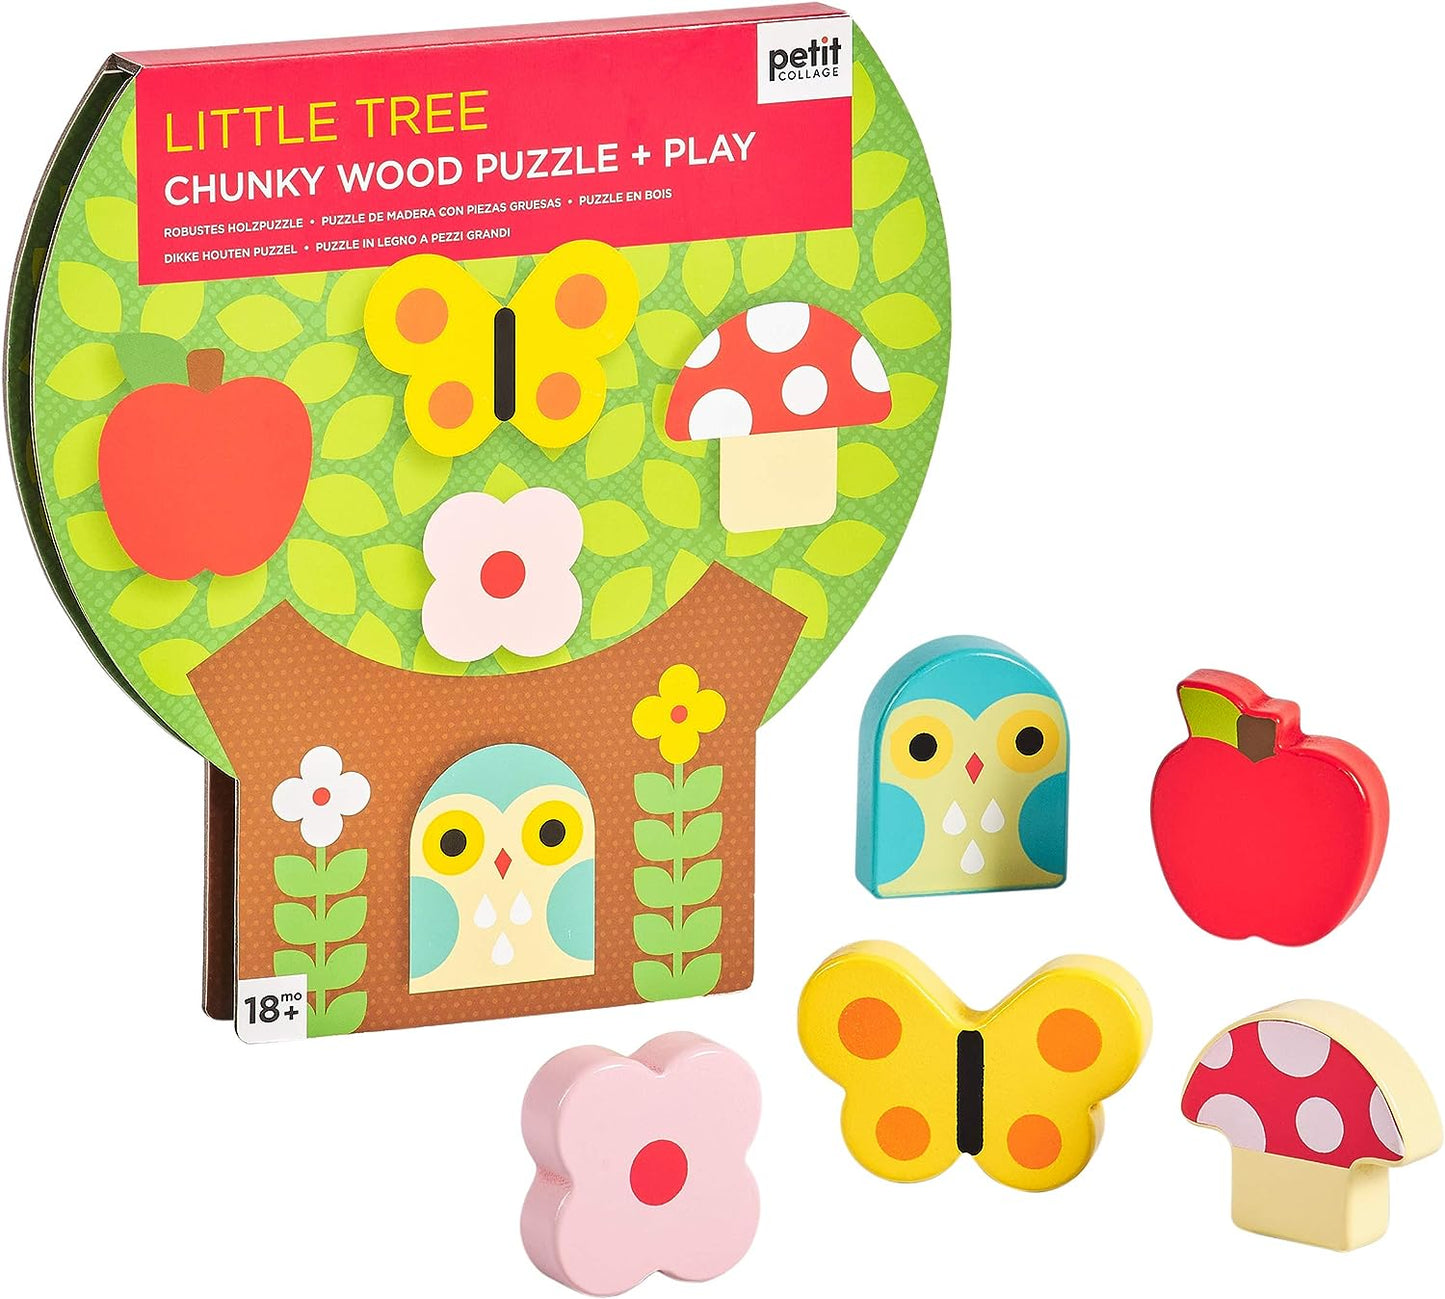 Little Tree Chunky Wooden Puzzle